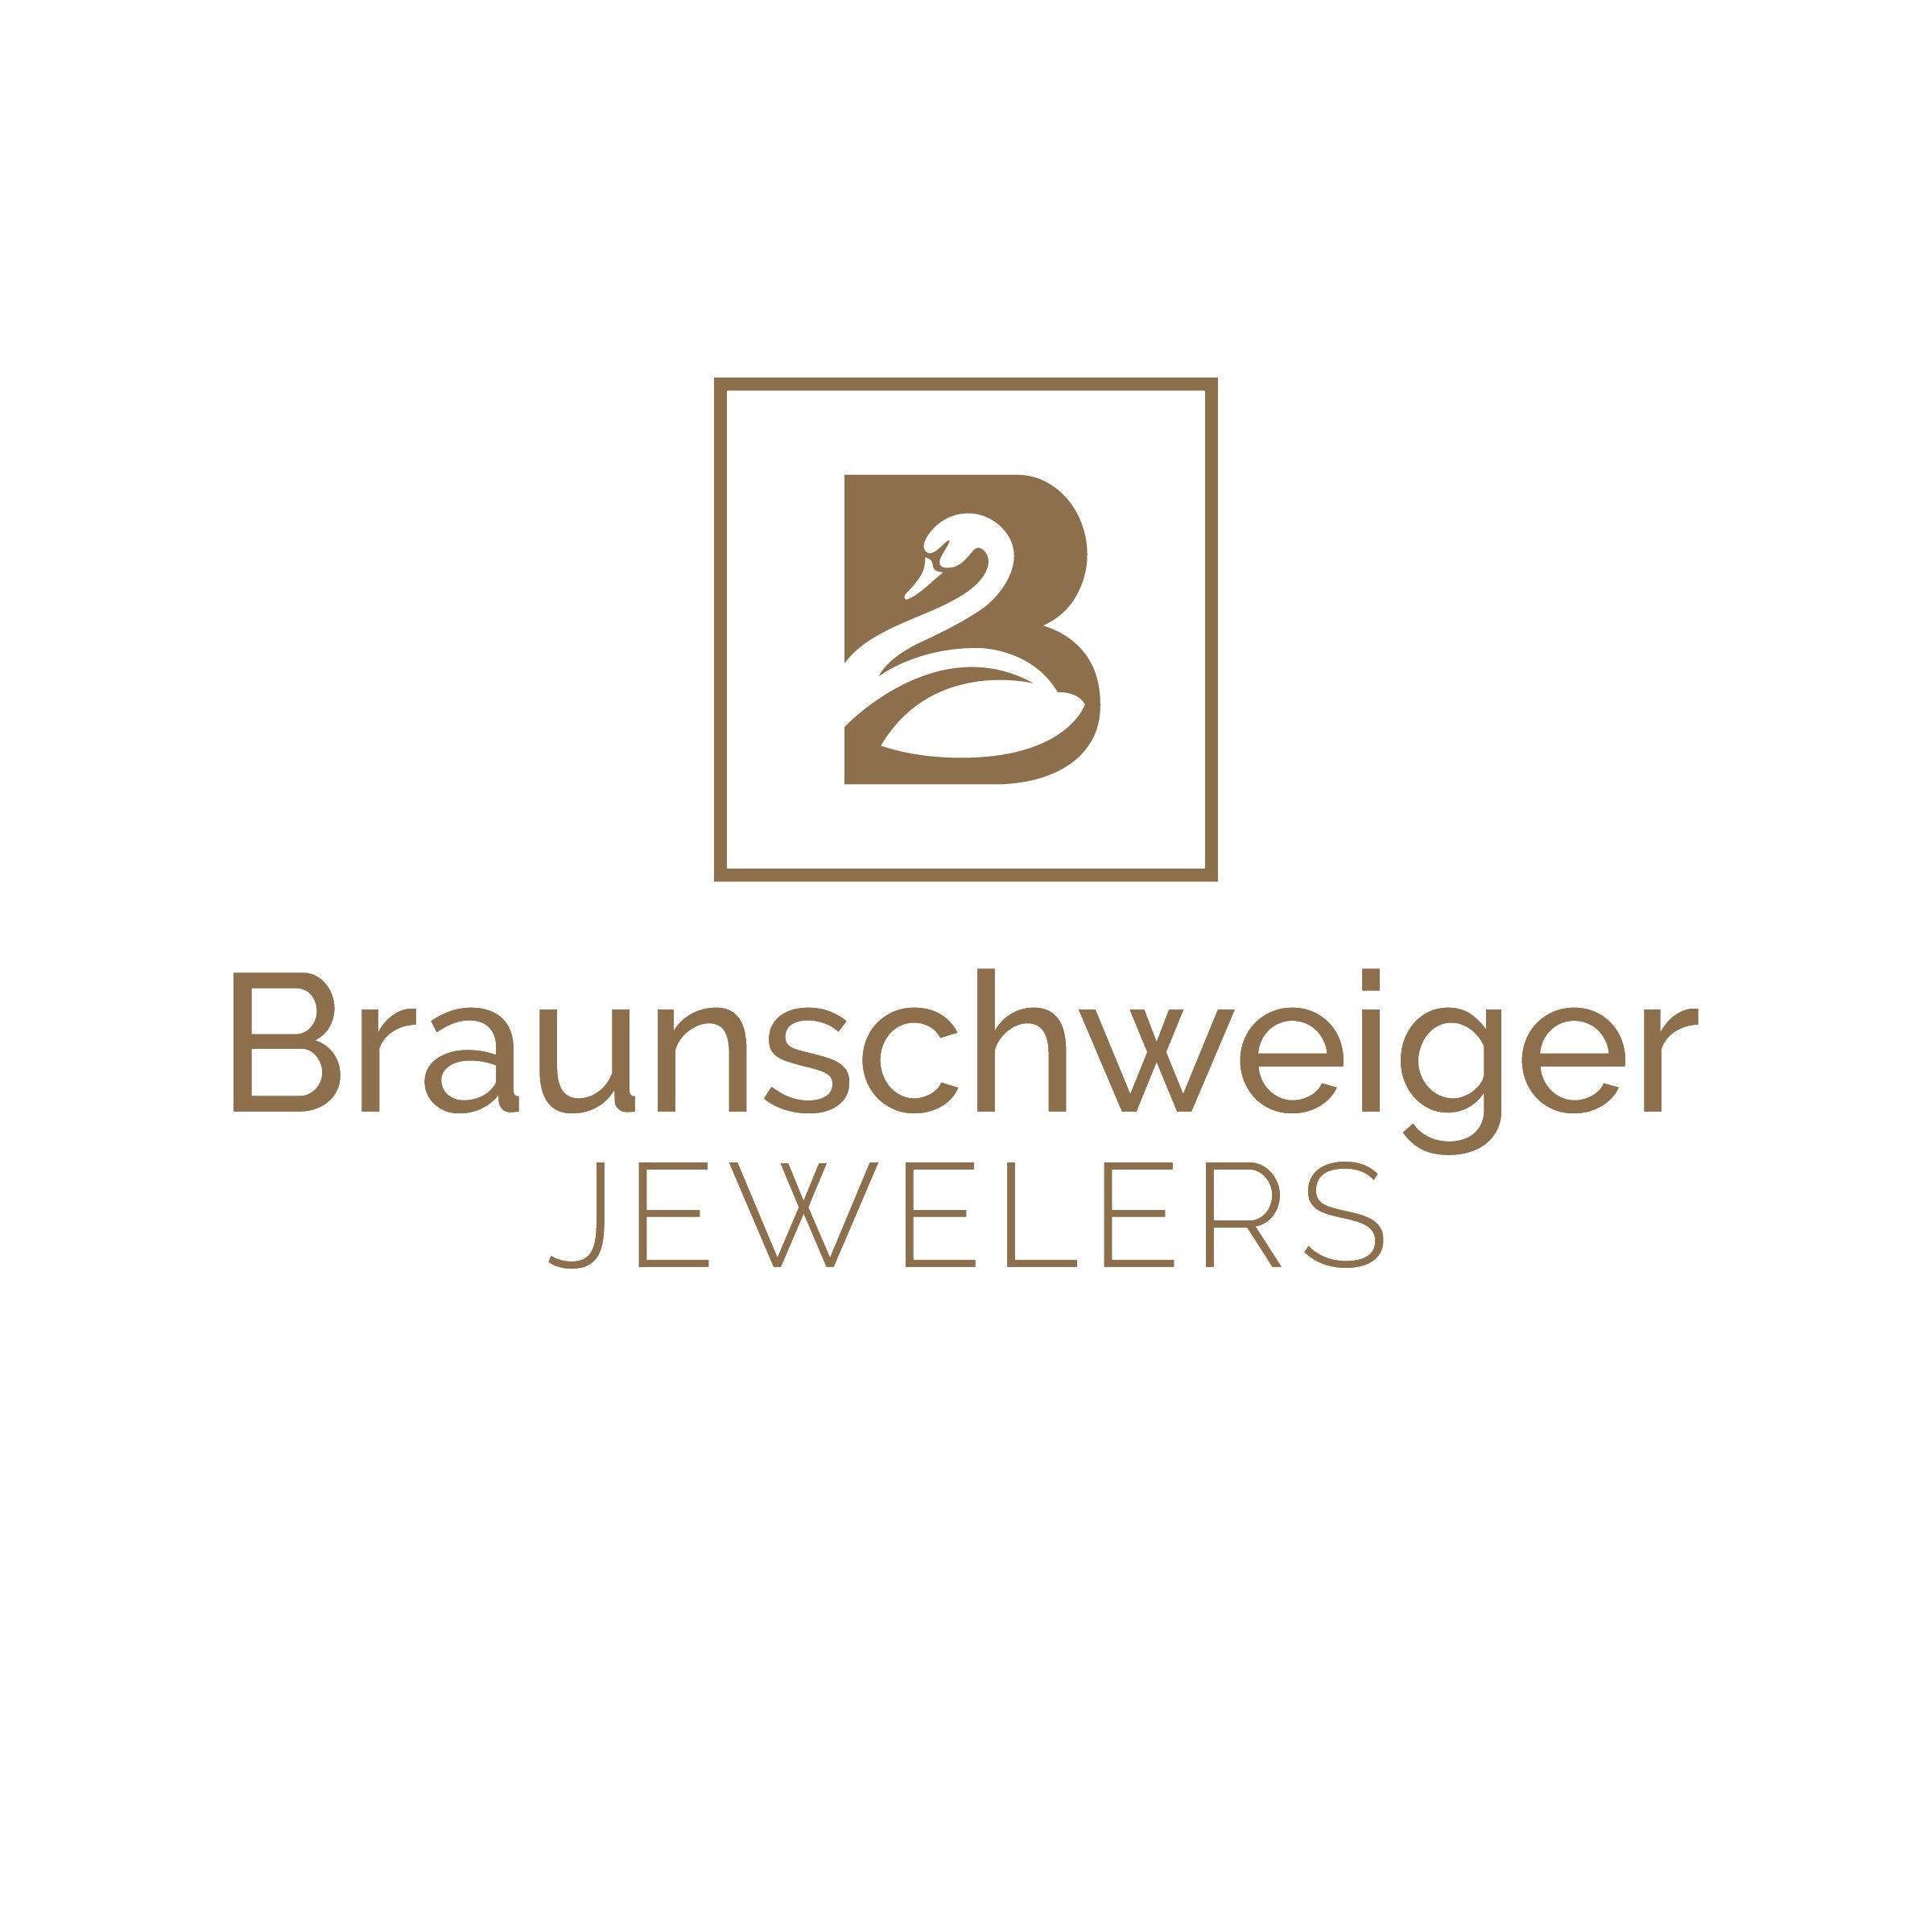 Our New Look! – Braunschweiger Jewelers